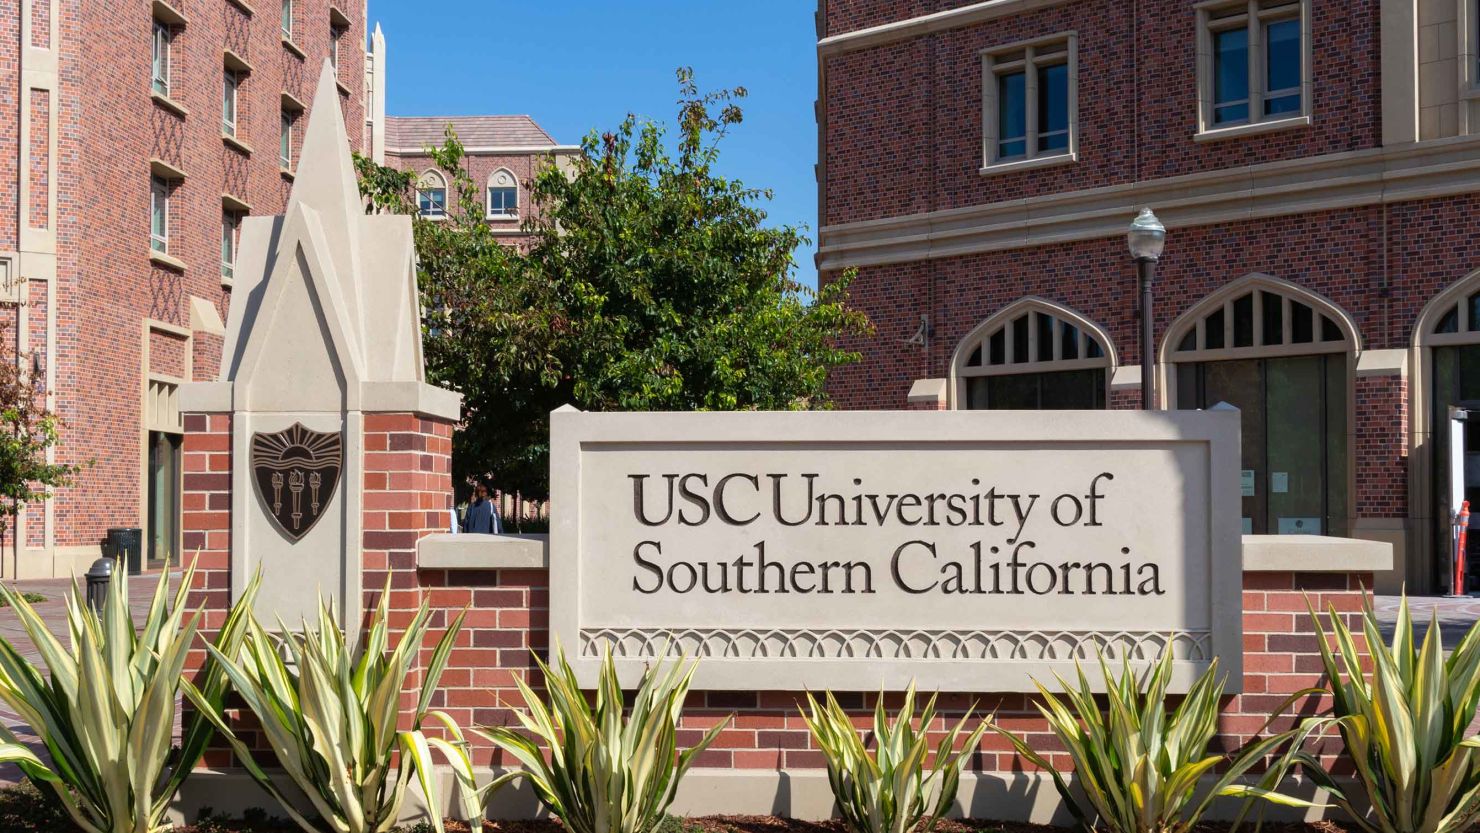 Touring the University of Southern California Campus